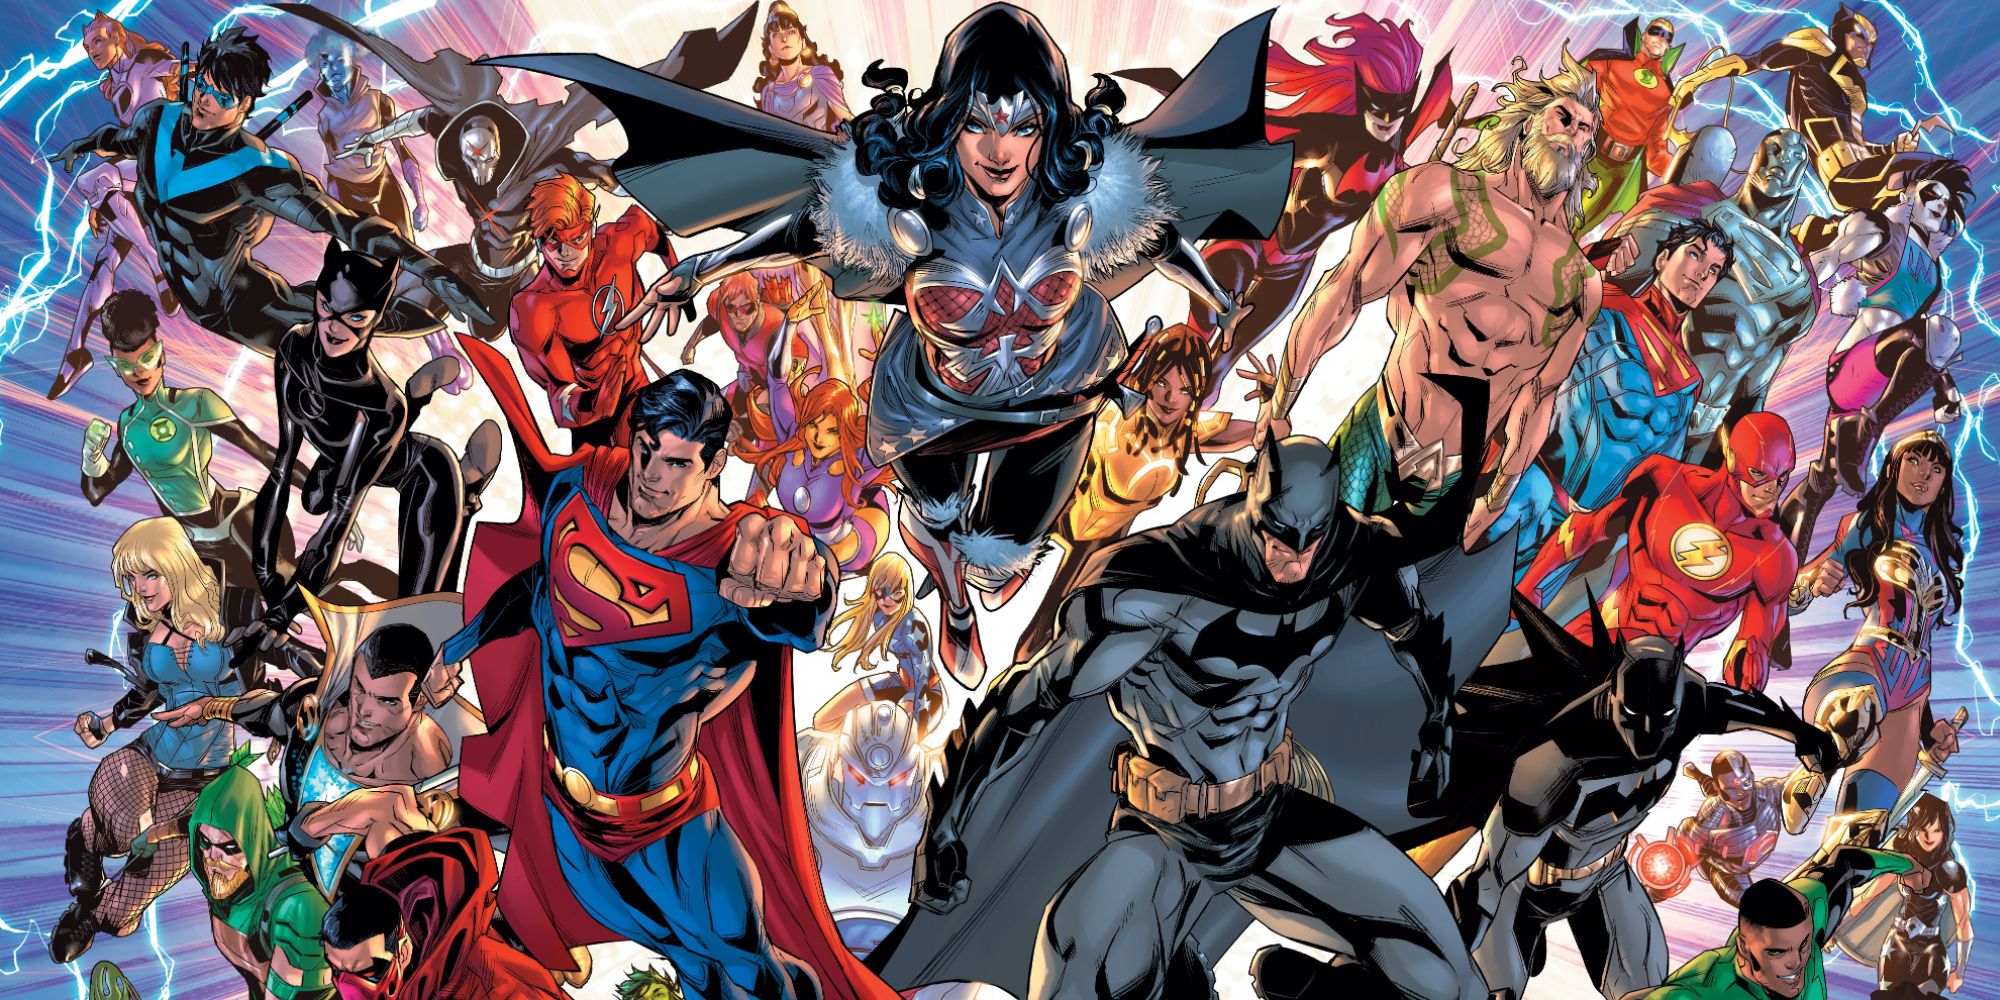 DC's roster of superheroes, including Superman, Batman and Wonder Woman.